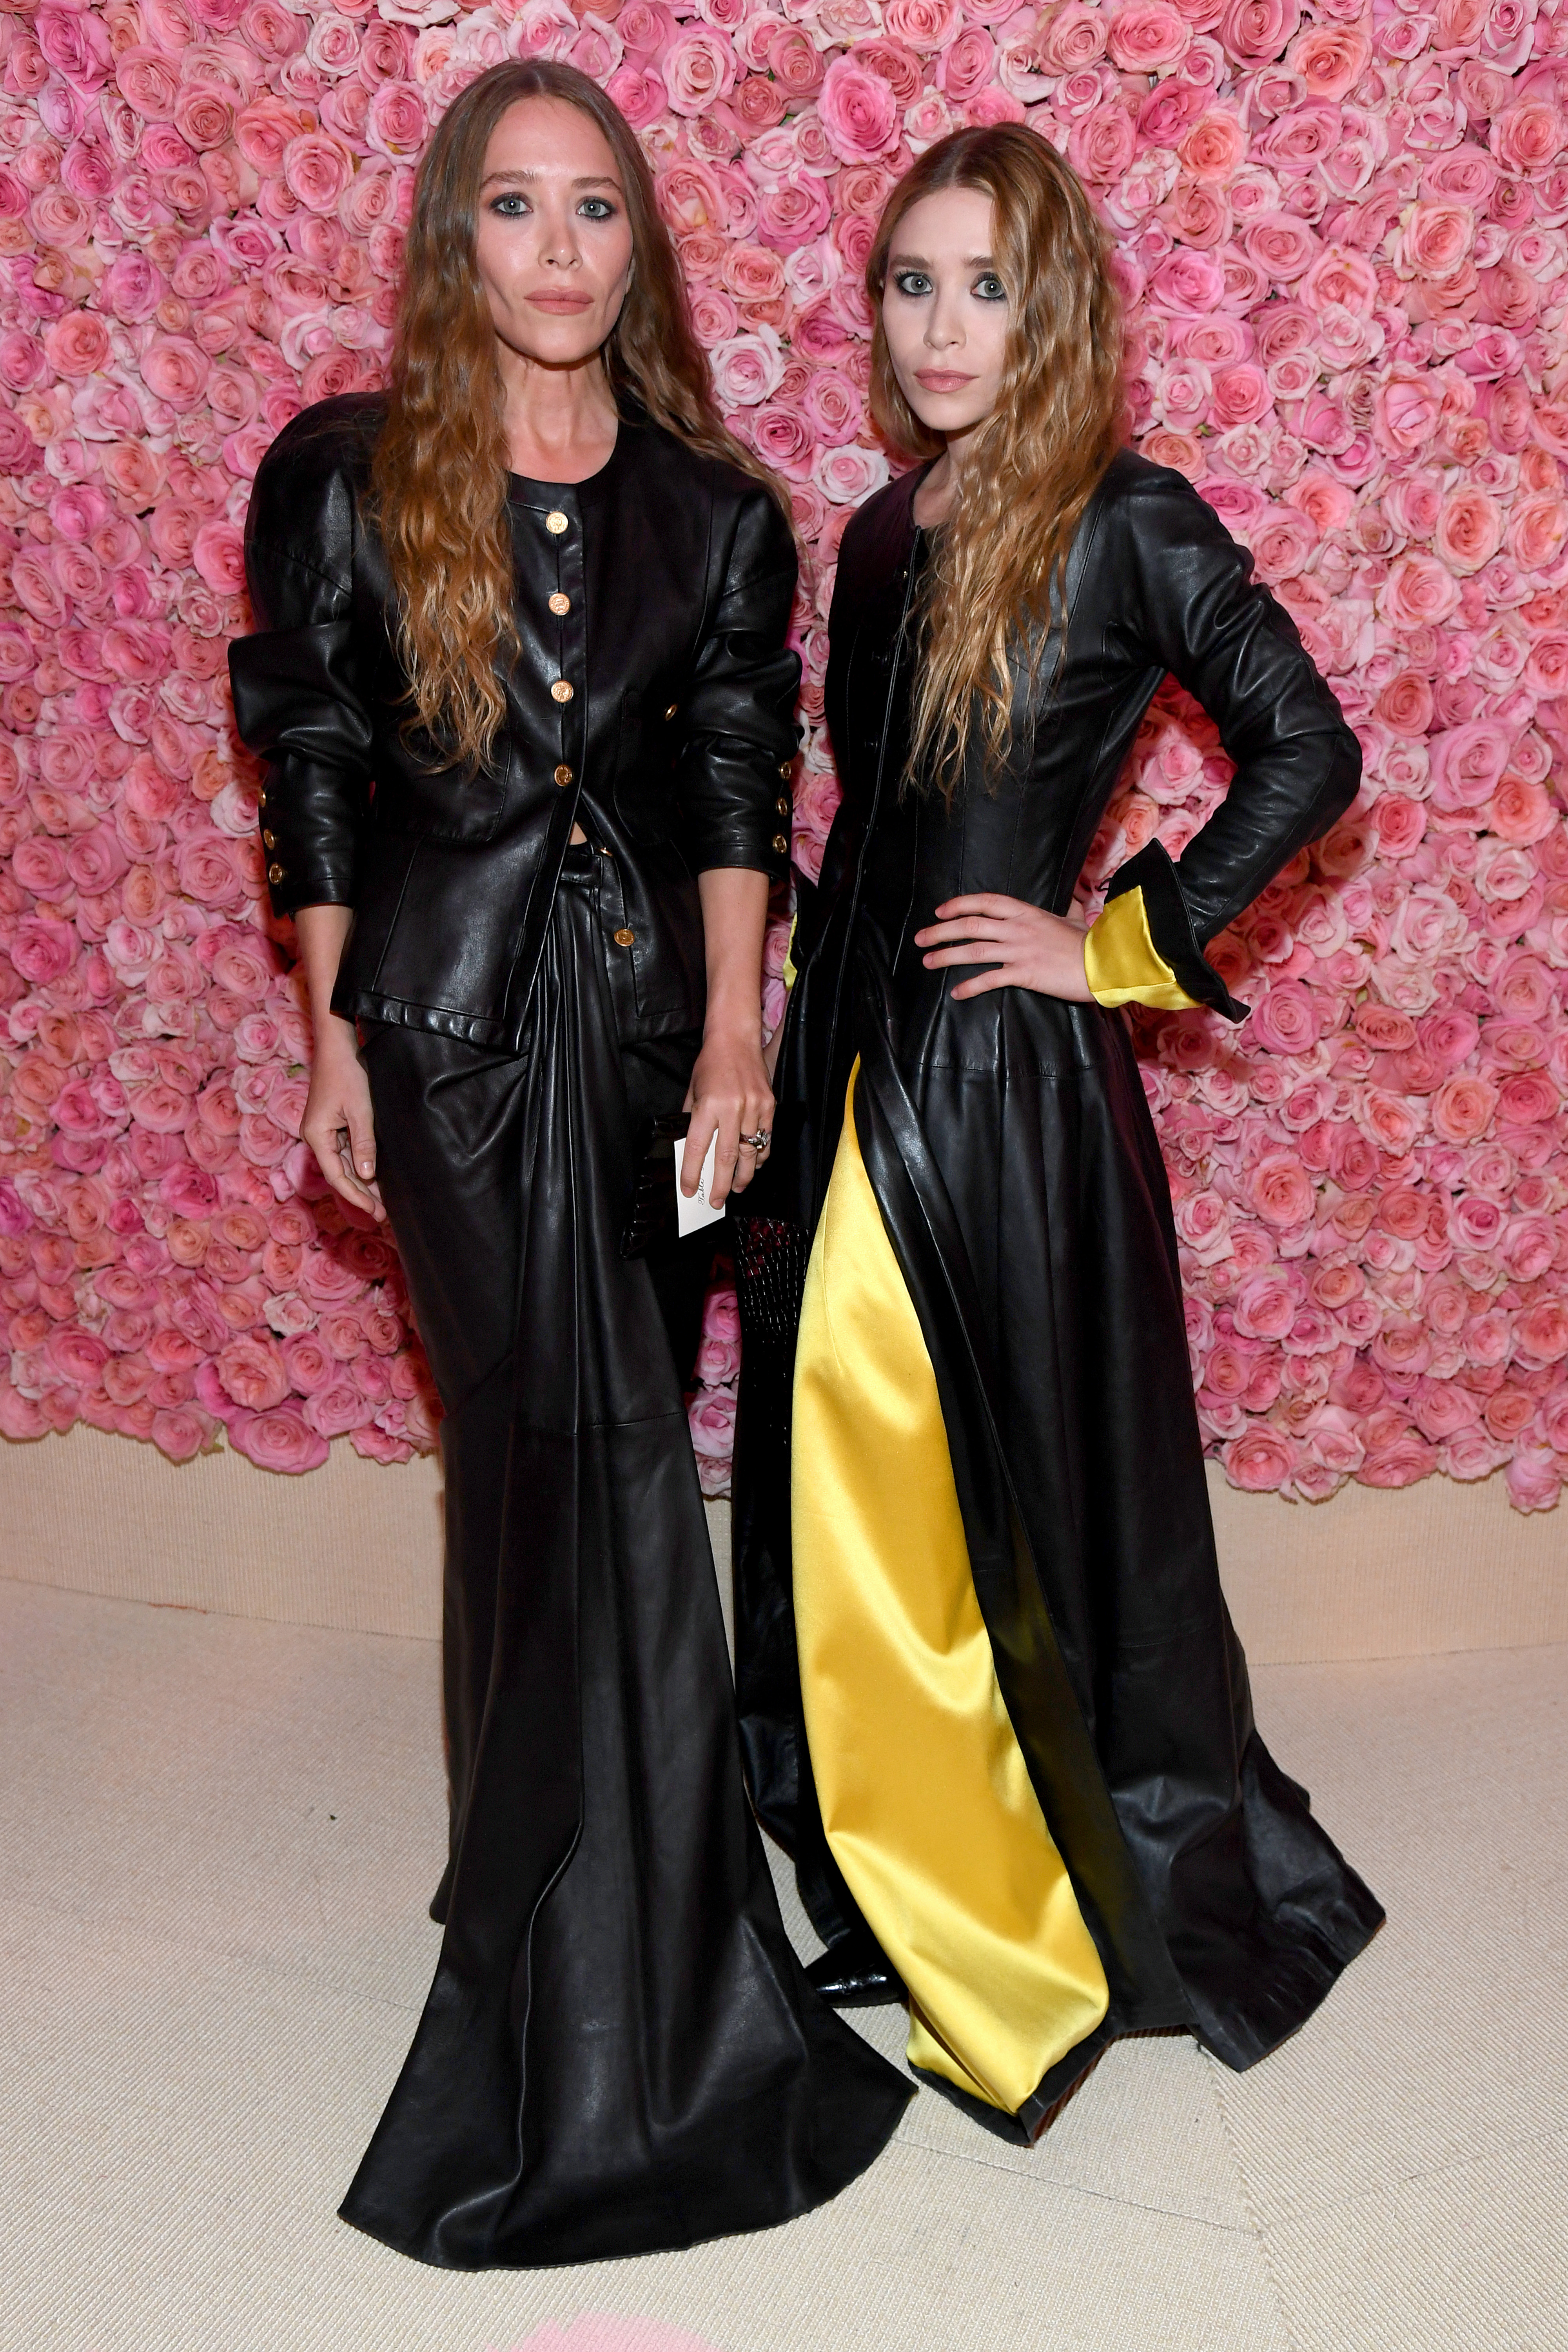 Mary-Kate and Ashley Olsen's best style | Gallery Wonderwall.com